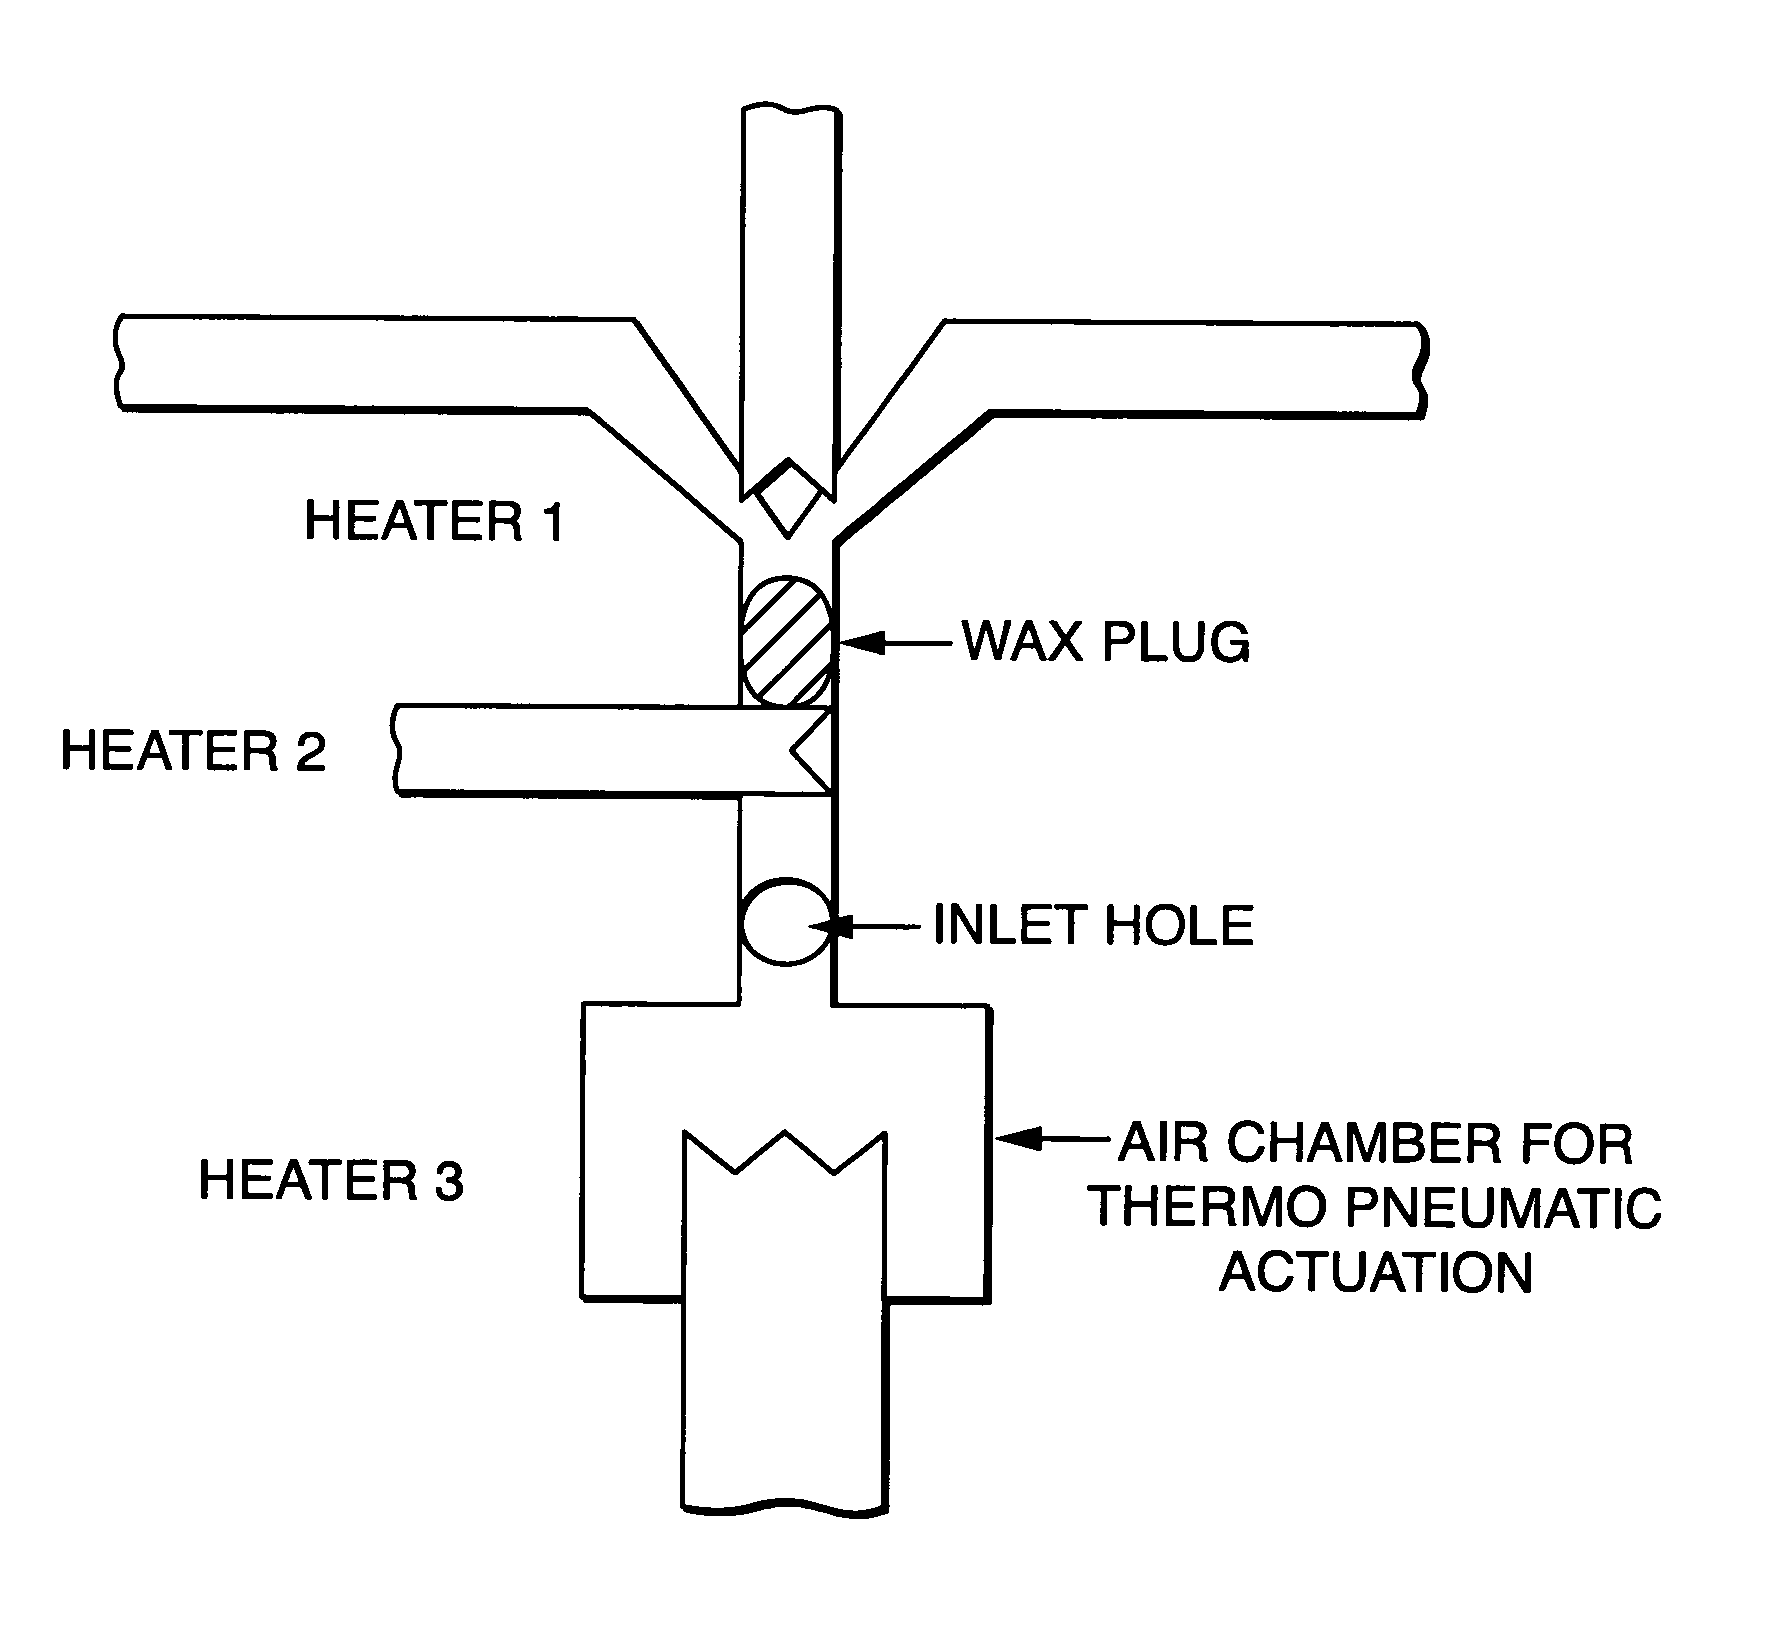 Thermal micro-valves for micro-integrated devices